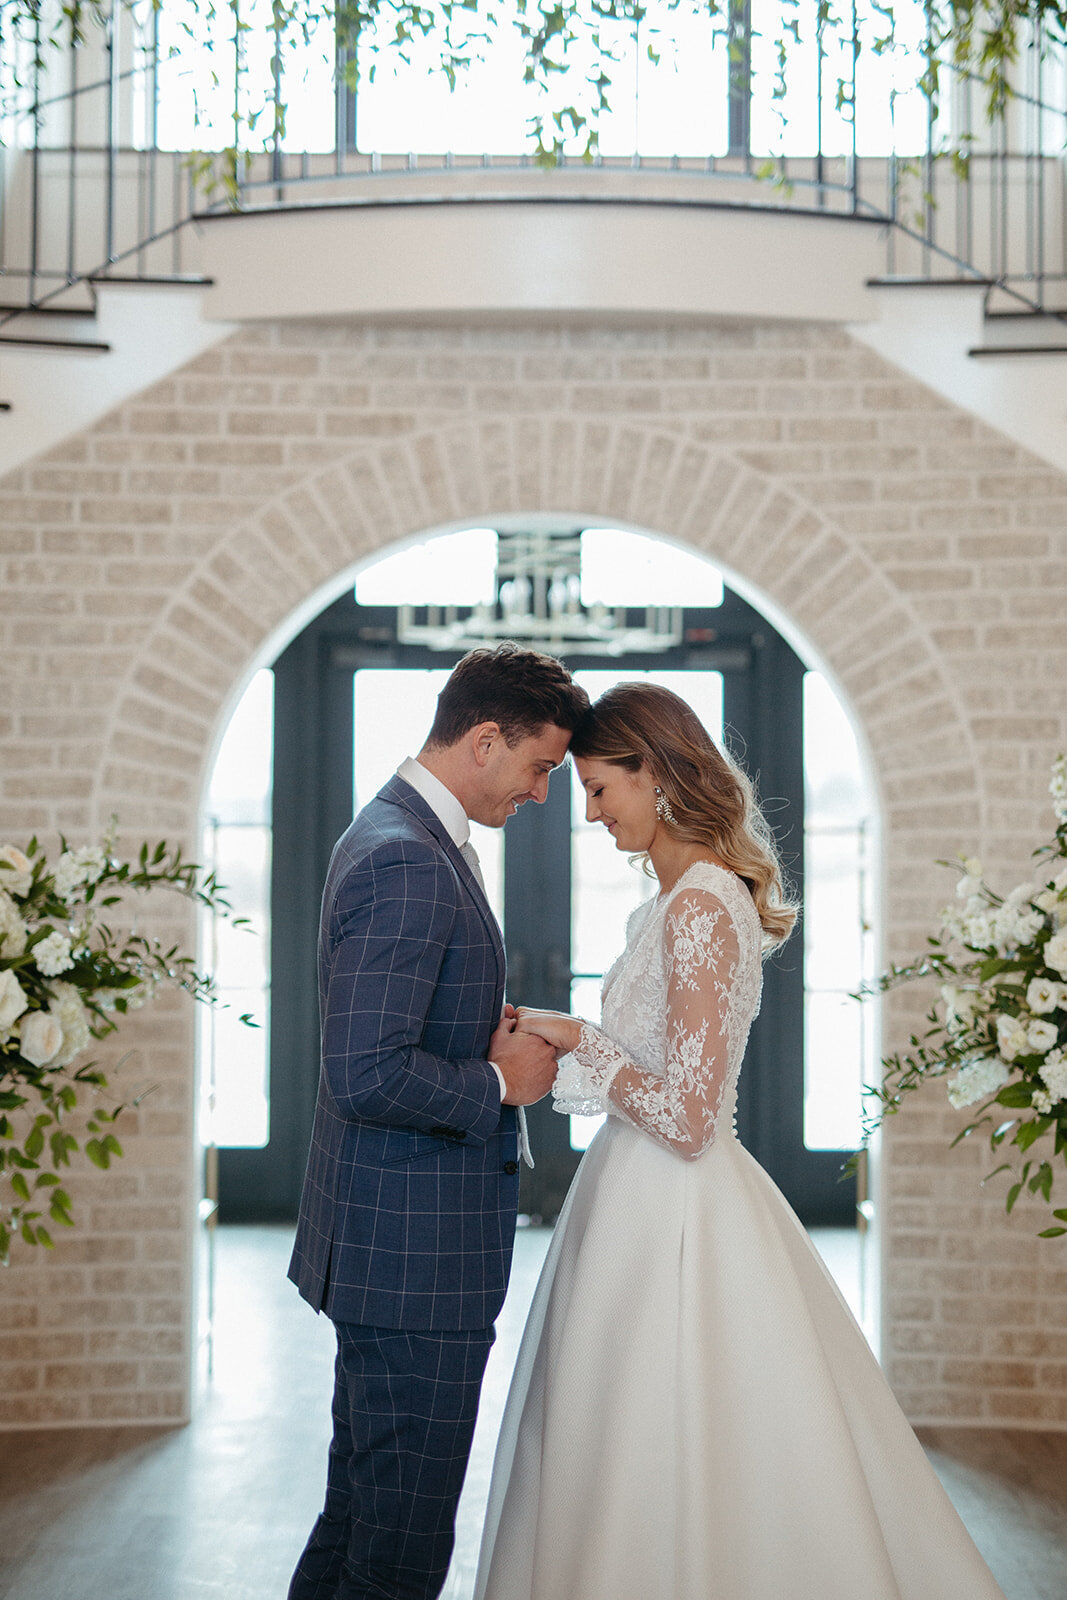 Bride and groom in a blue suit and white wedding gown holding hands in front of a whitewashed brick wall with flowers.